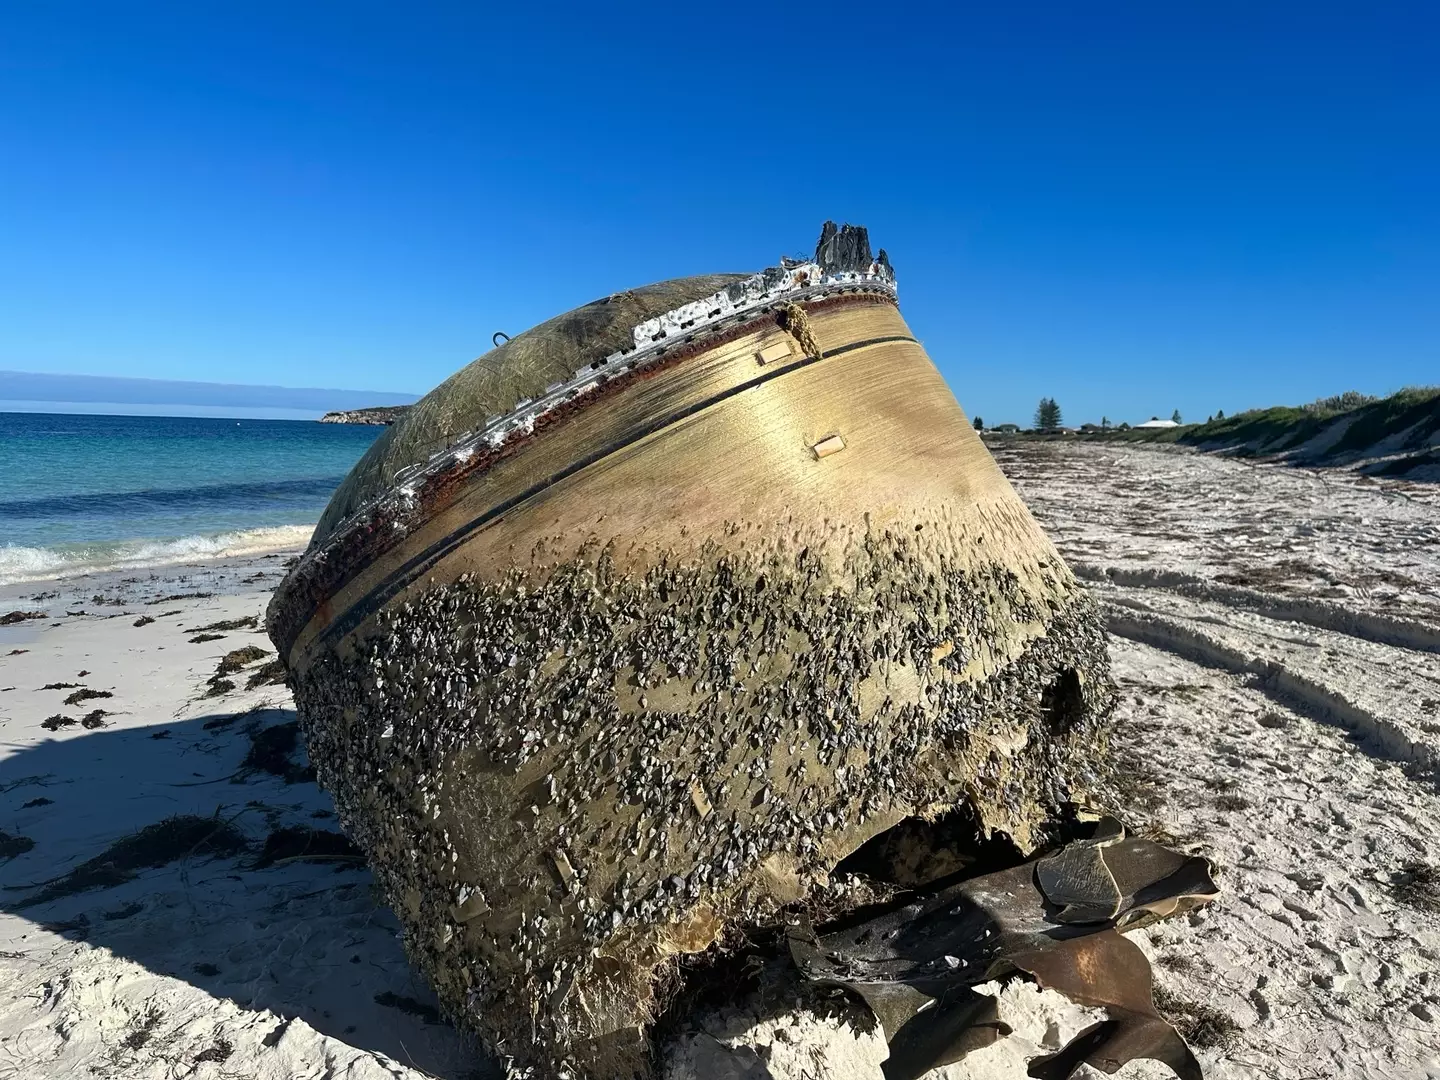 The mysterious object washed up on the beach in a remote town in Western Australia.